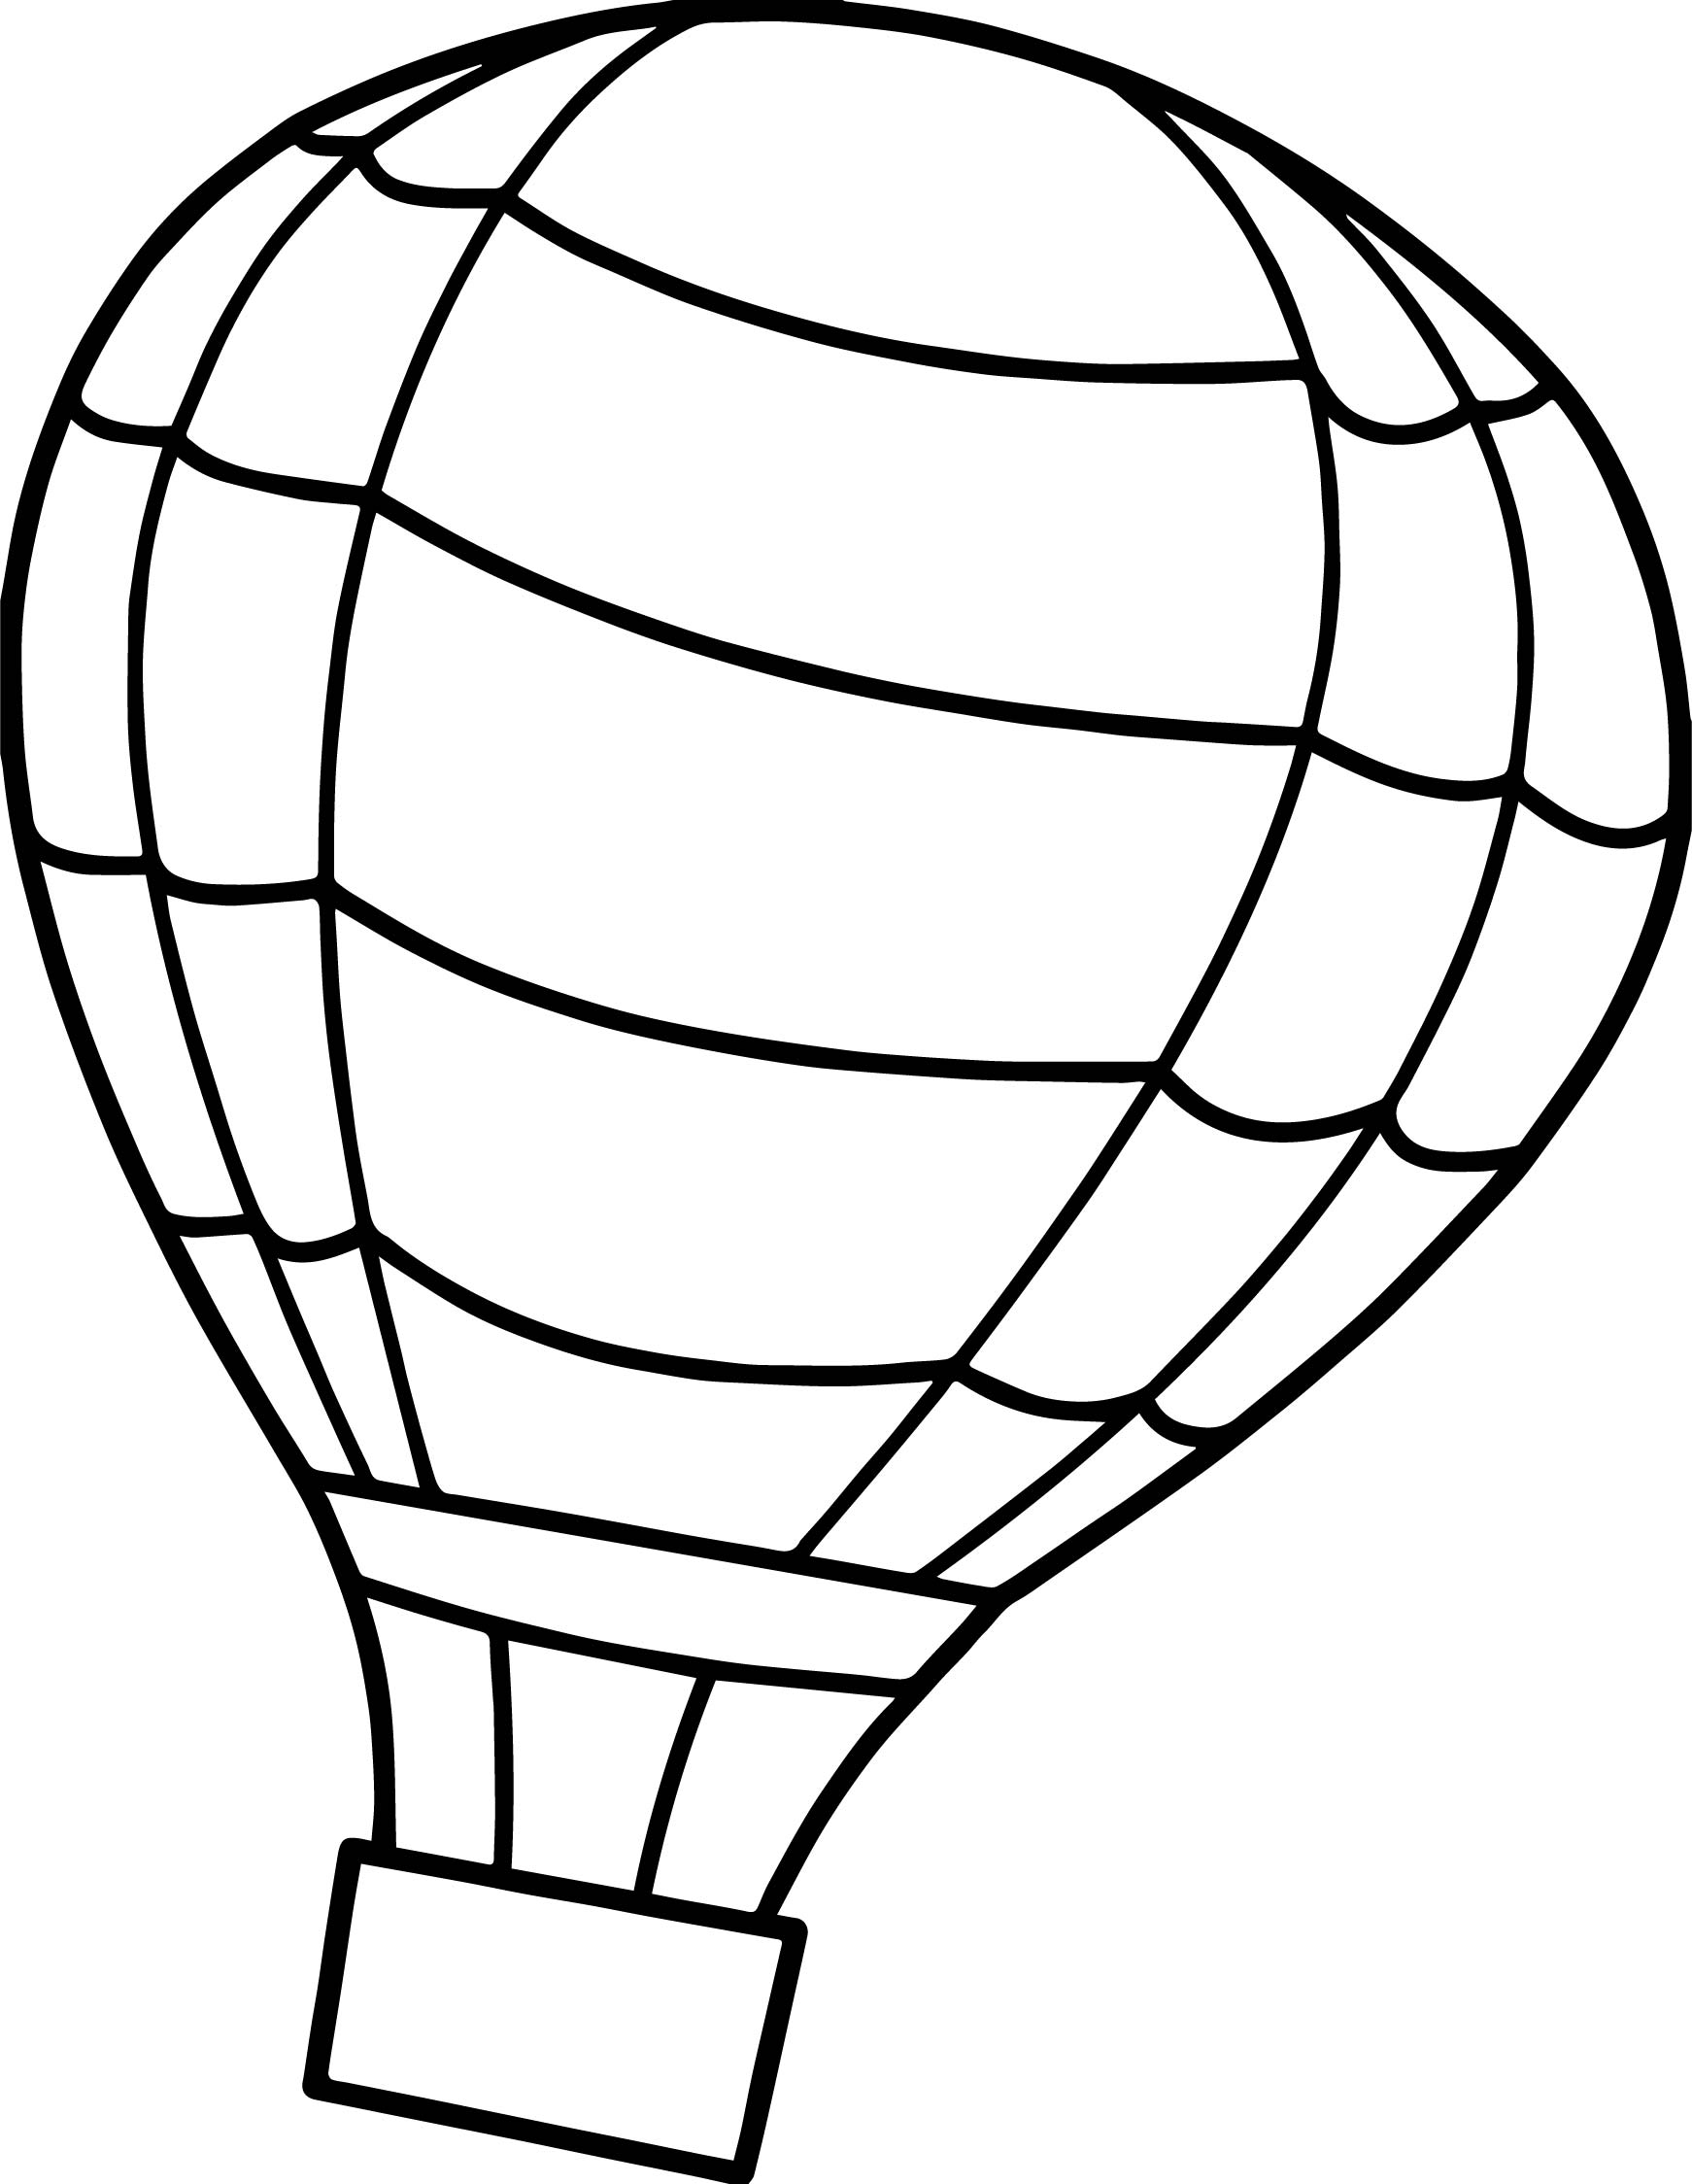 hot air balloon coloring pages hot air balloons in the sky worksheet educationcom air coloring pages balloon hot 